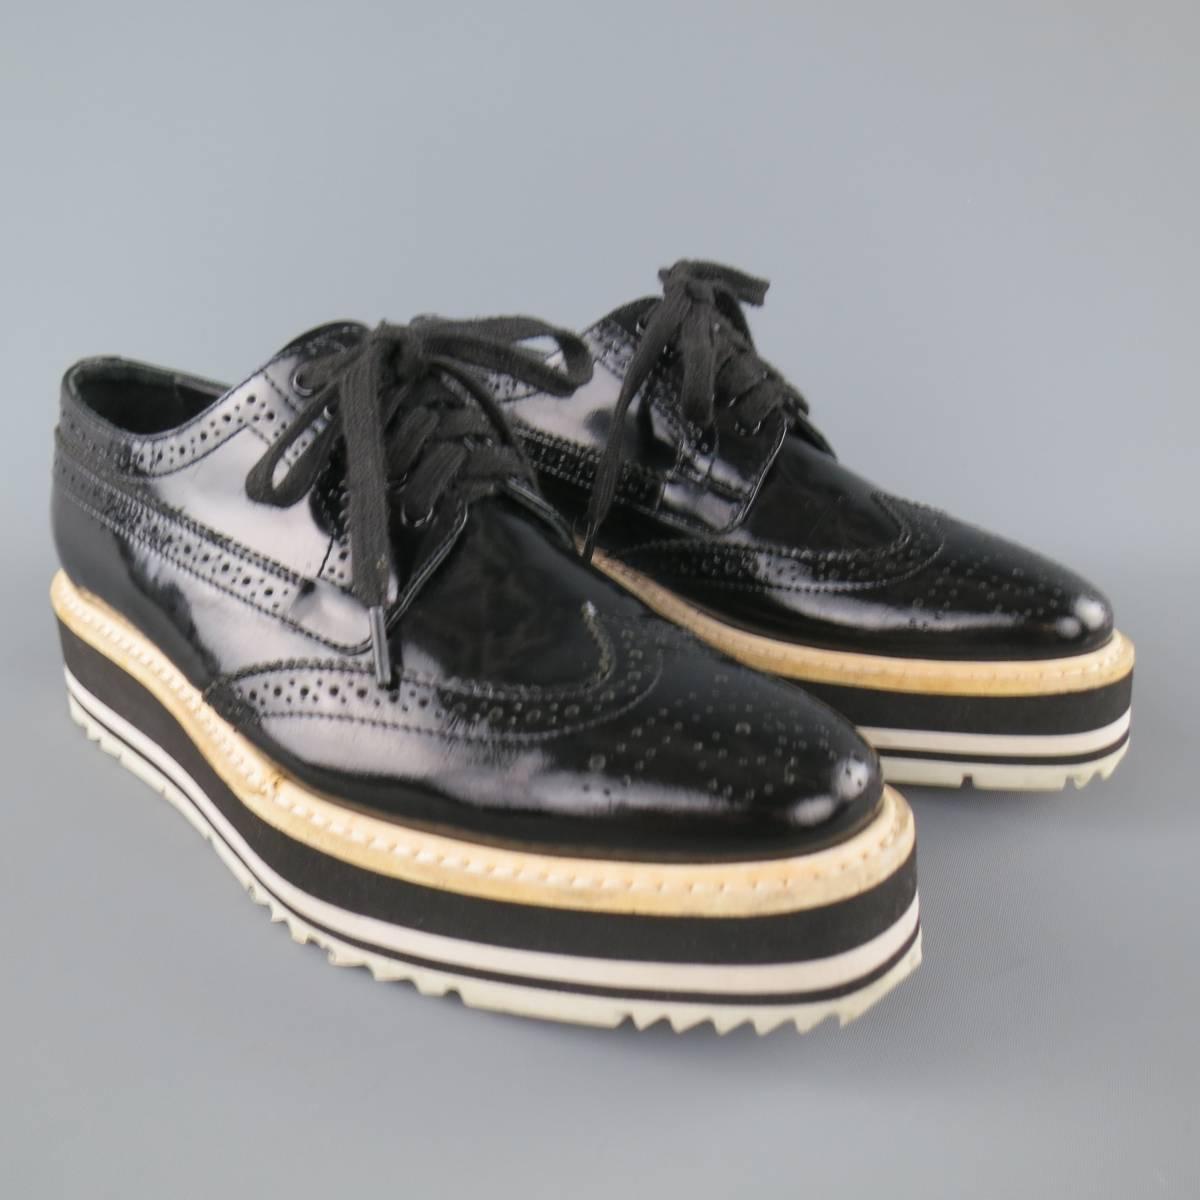 PRADA brogues come in a glossy patent leather and feature a wingtip, perforated details throughout, and black and white striped platform sole. Made in Italy.
 
Good Pre-Owned Condition.
Marked: 36
 
Platform: 1.5 in.


Web ID: 83054 